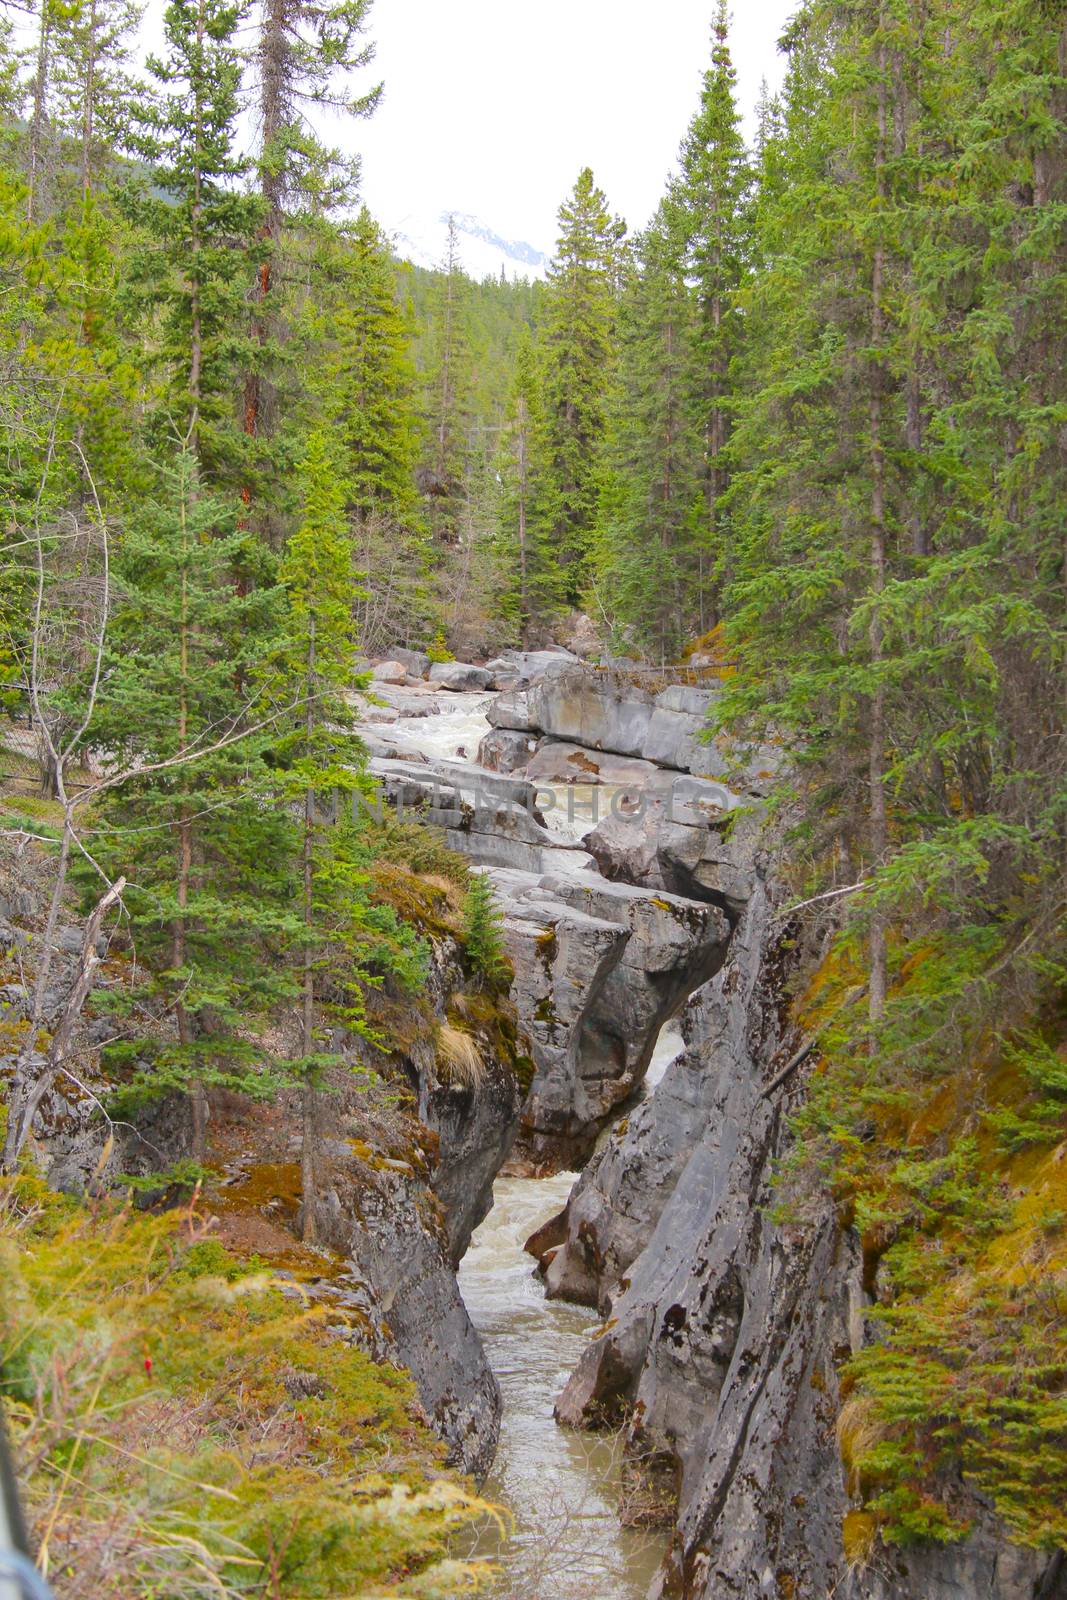 Rock formation with a stream carving amongst trees